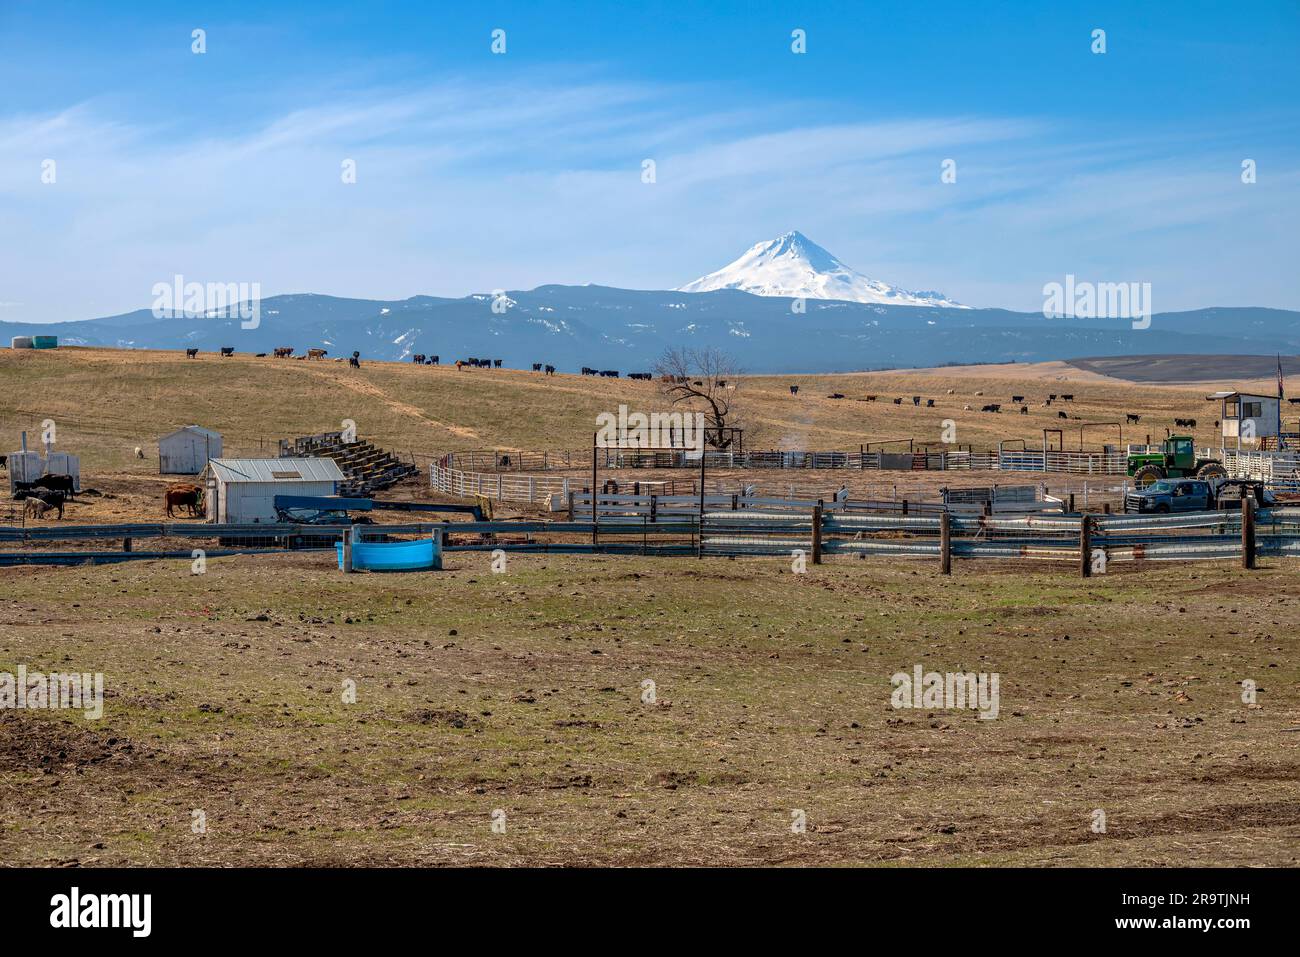 Cattle ranch with Mt. Hood in background, Oregon, USA Stock Photo